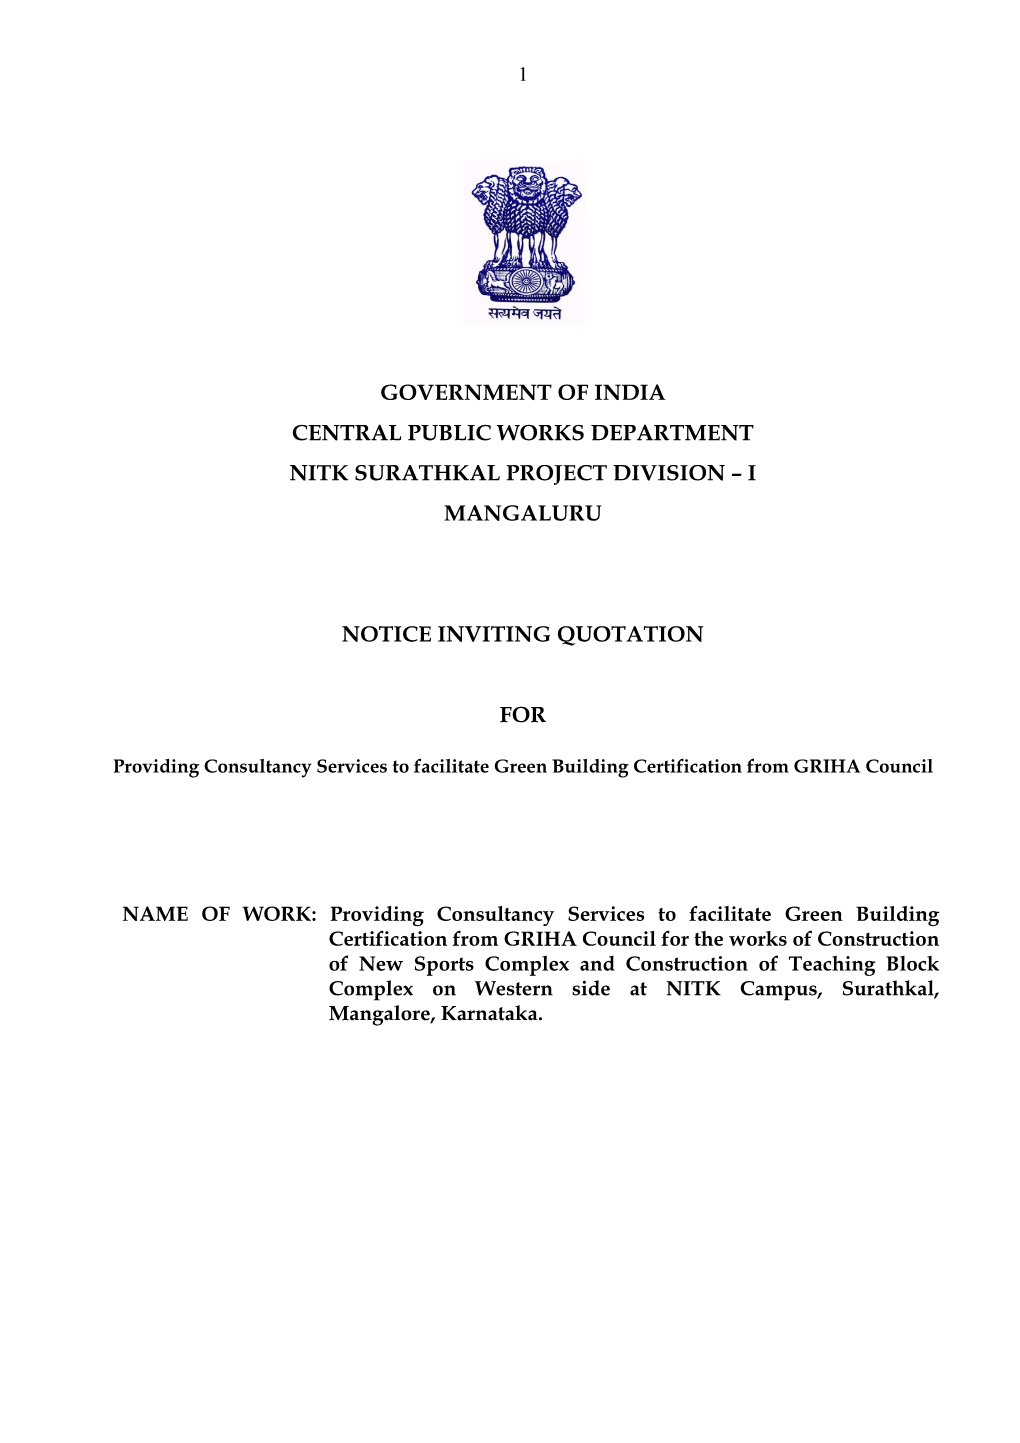 Government of India Central Public Works Department Nitk Surathkal Project Division – I Mangaluru Notice Inviting Quotation Fo